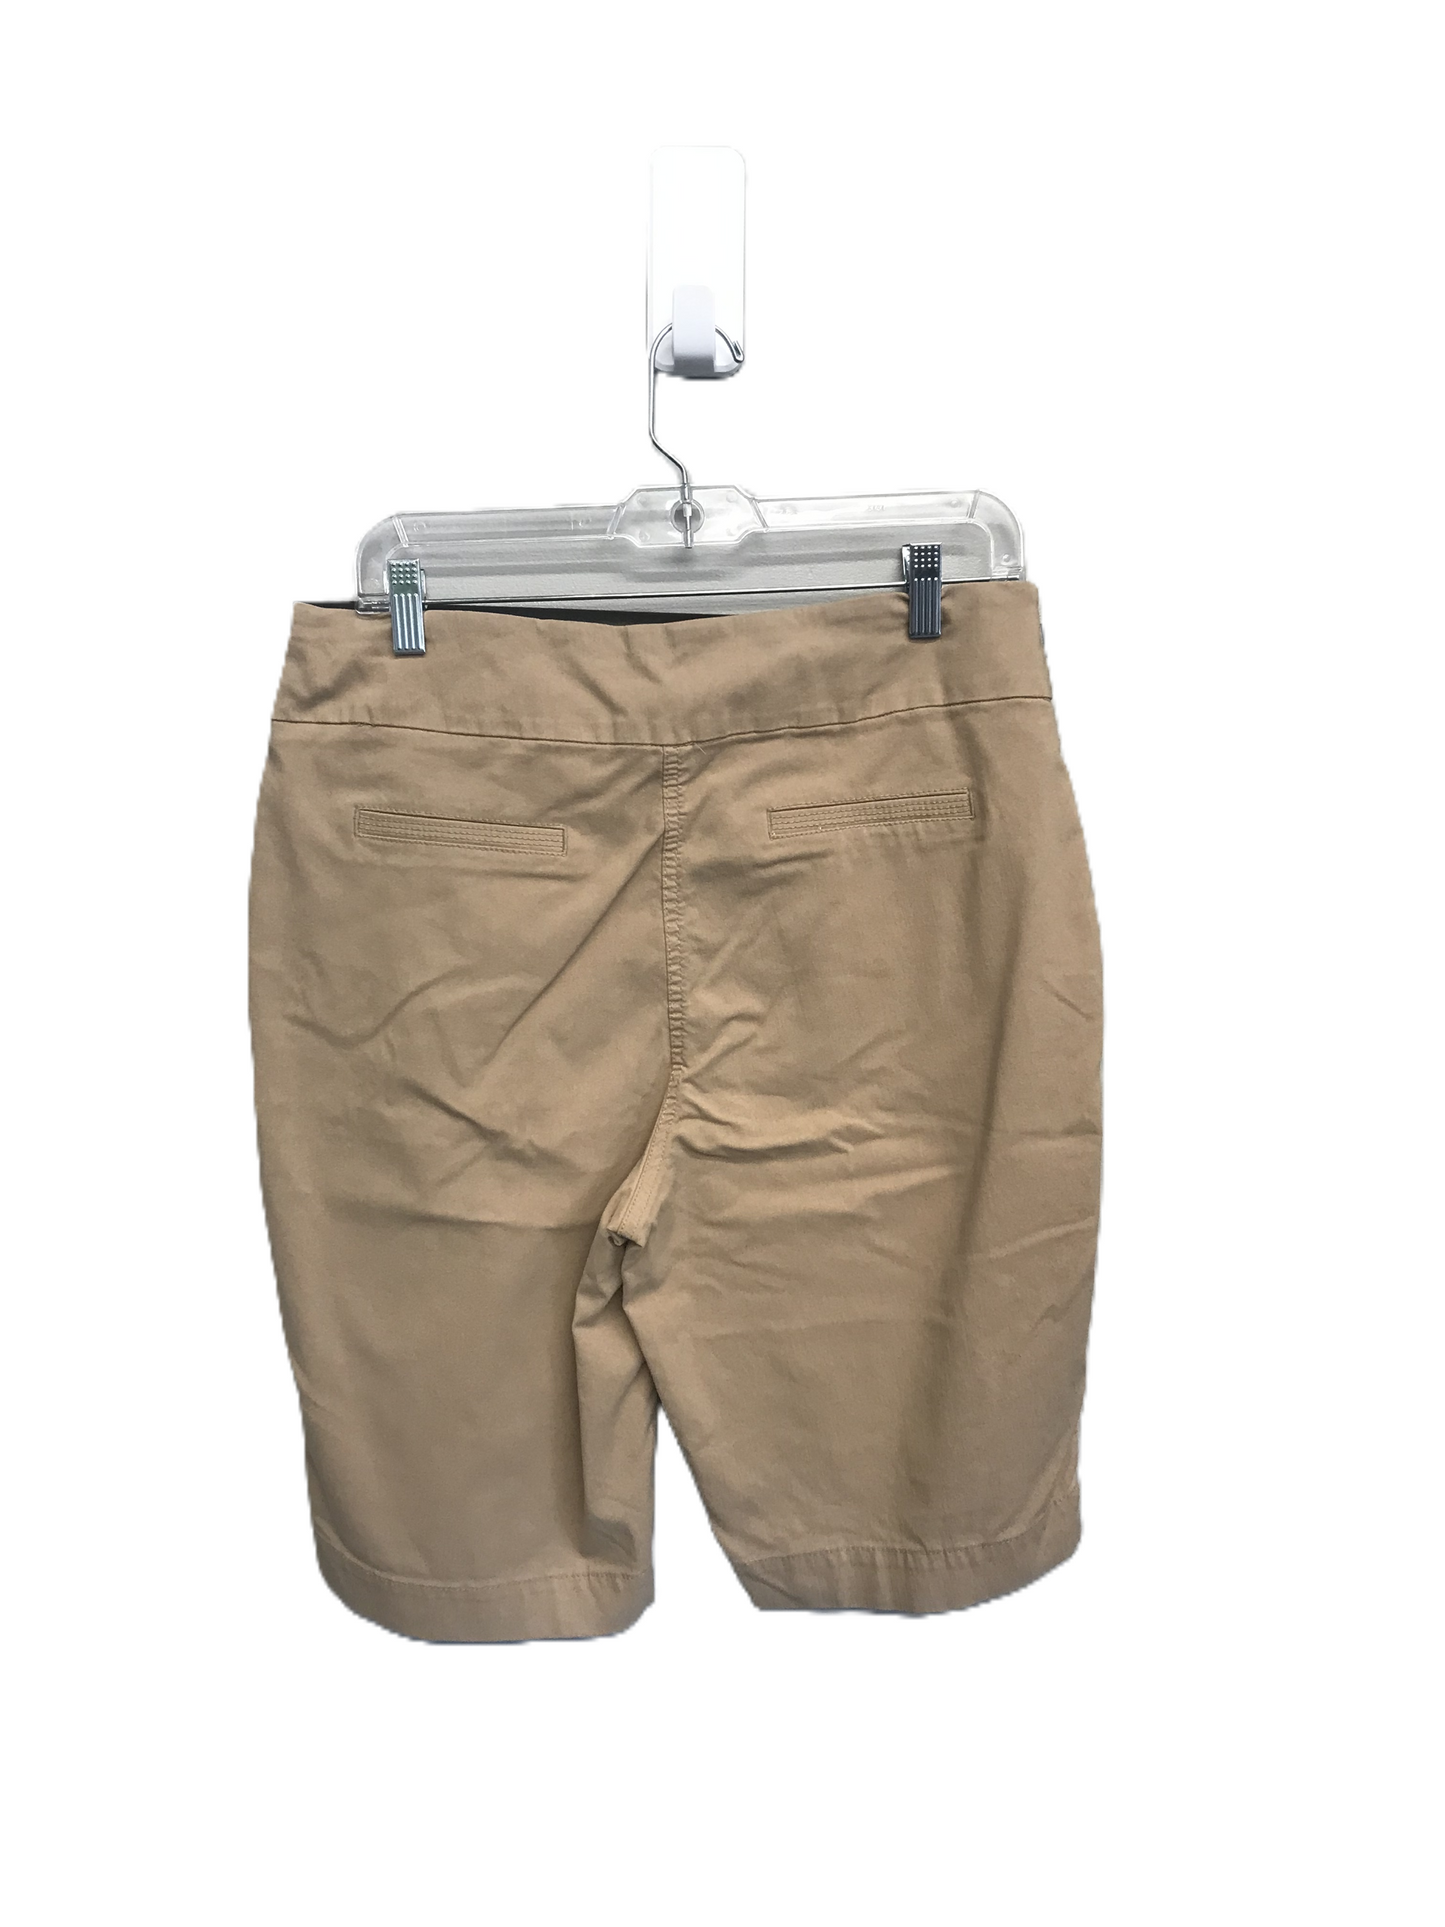 Tan Shorts By West Bound, Size: 14